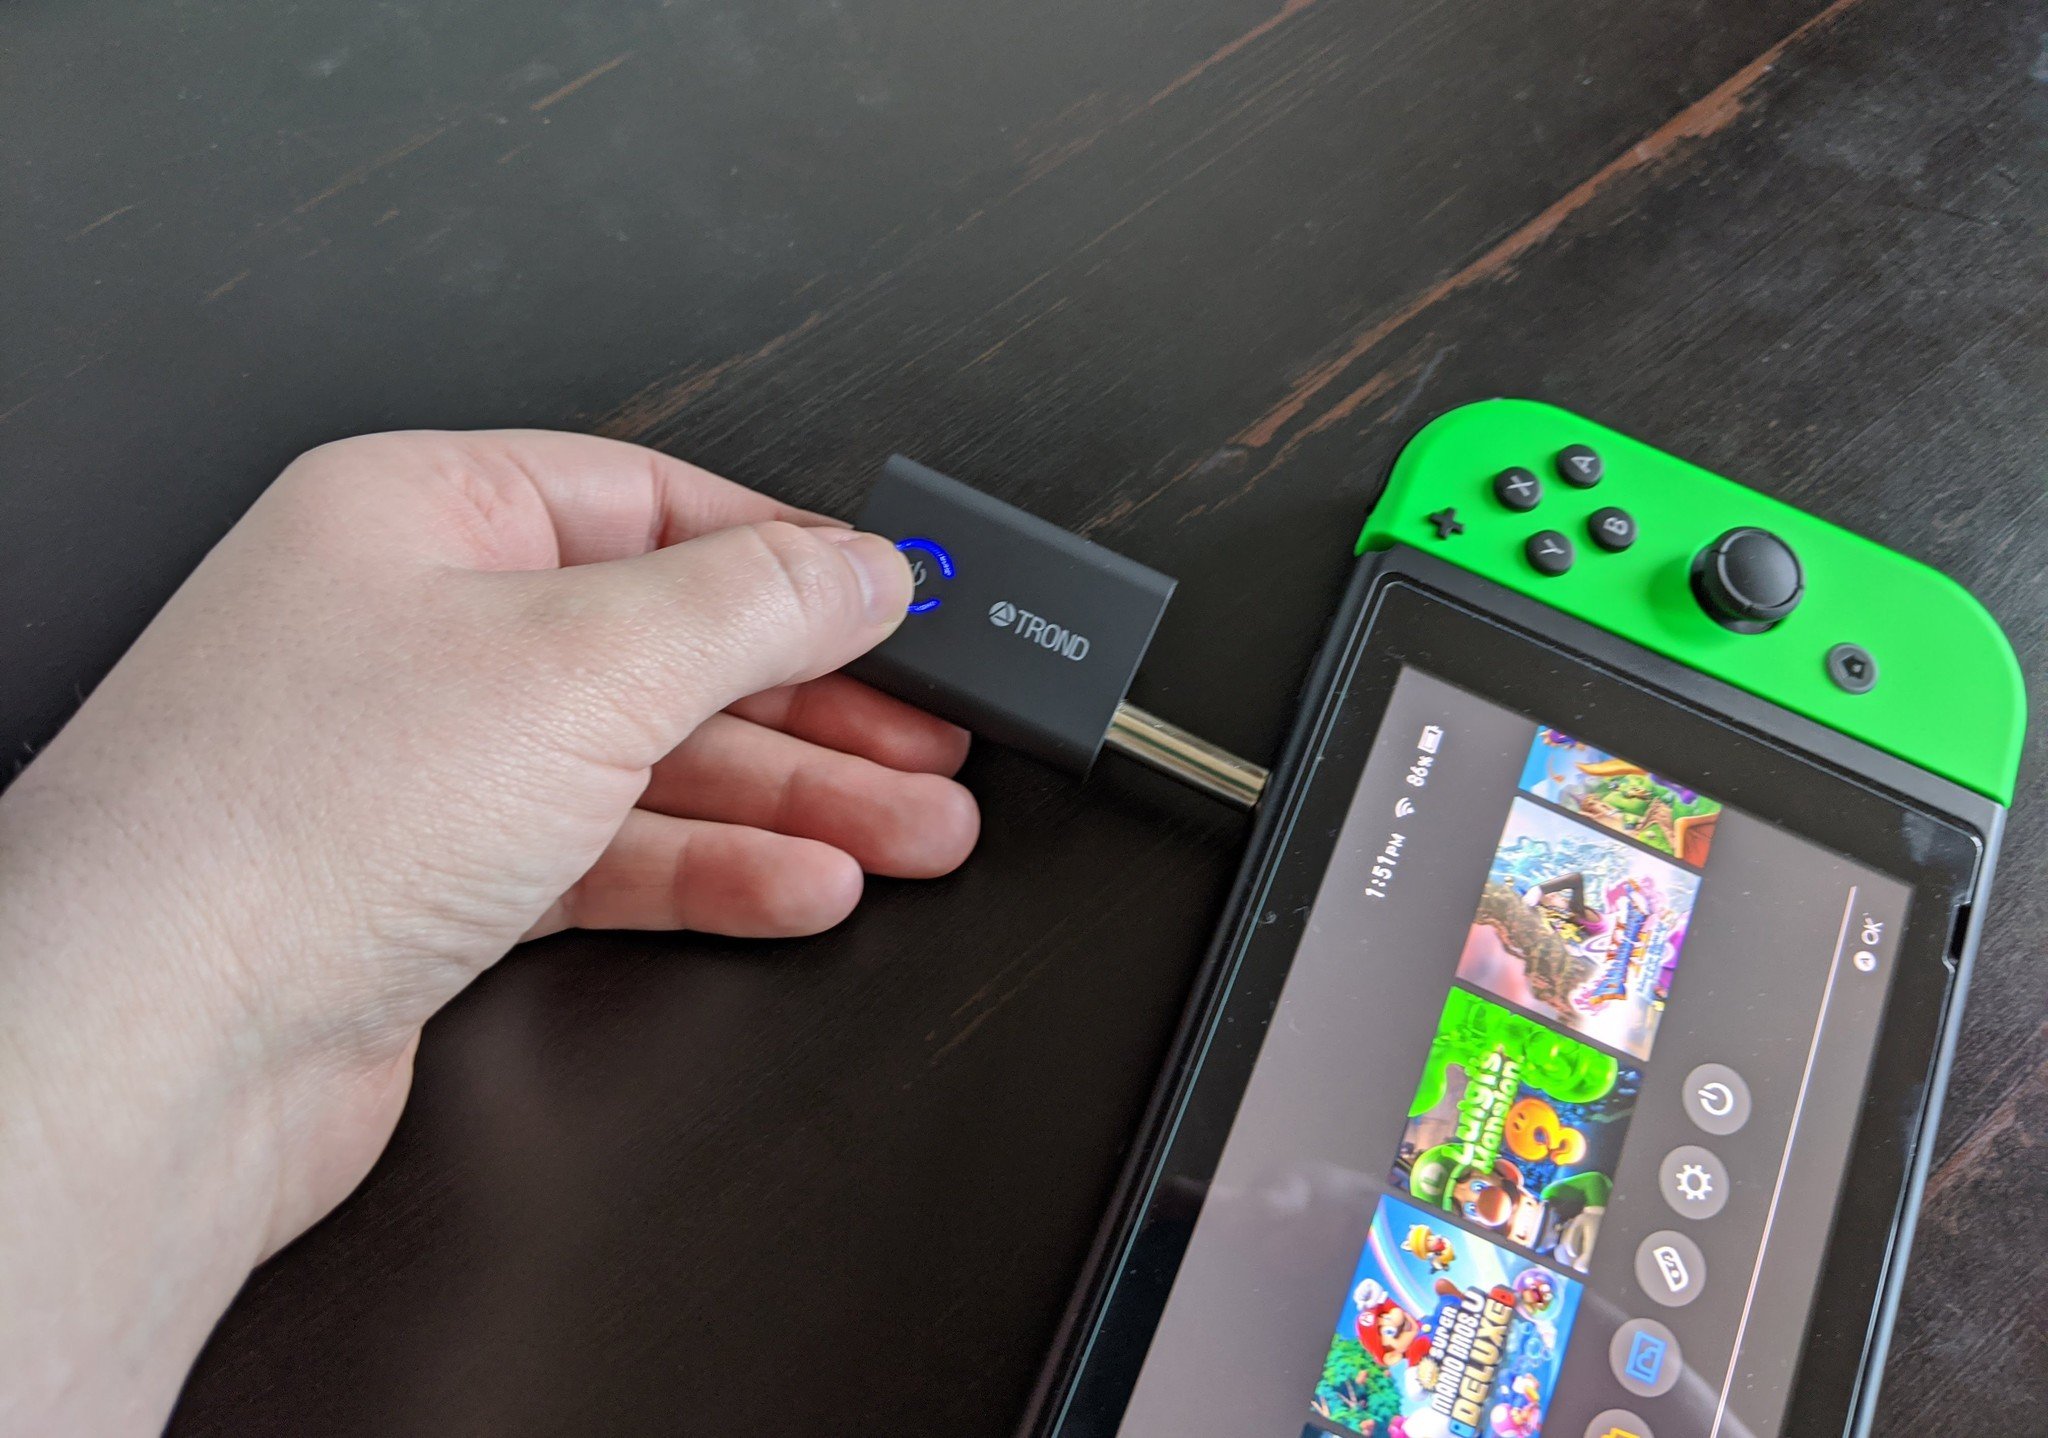 How to use Bluetooth headphones with a Nintendo Switch via the headphone jack: double tap the MFB button to activate pairing mode